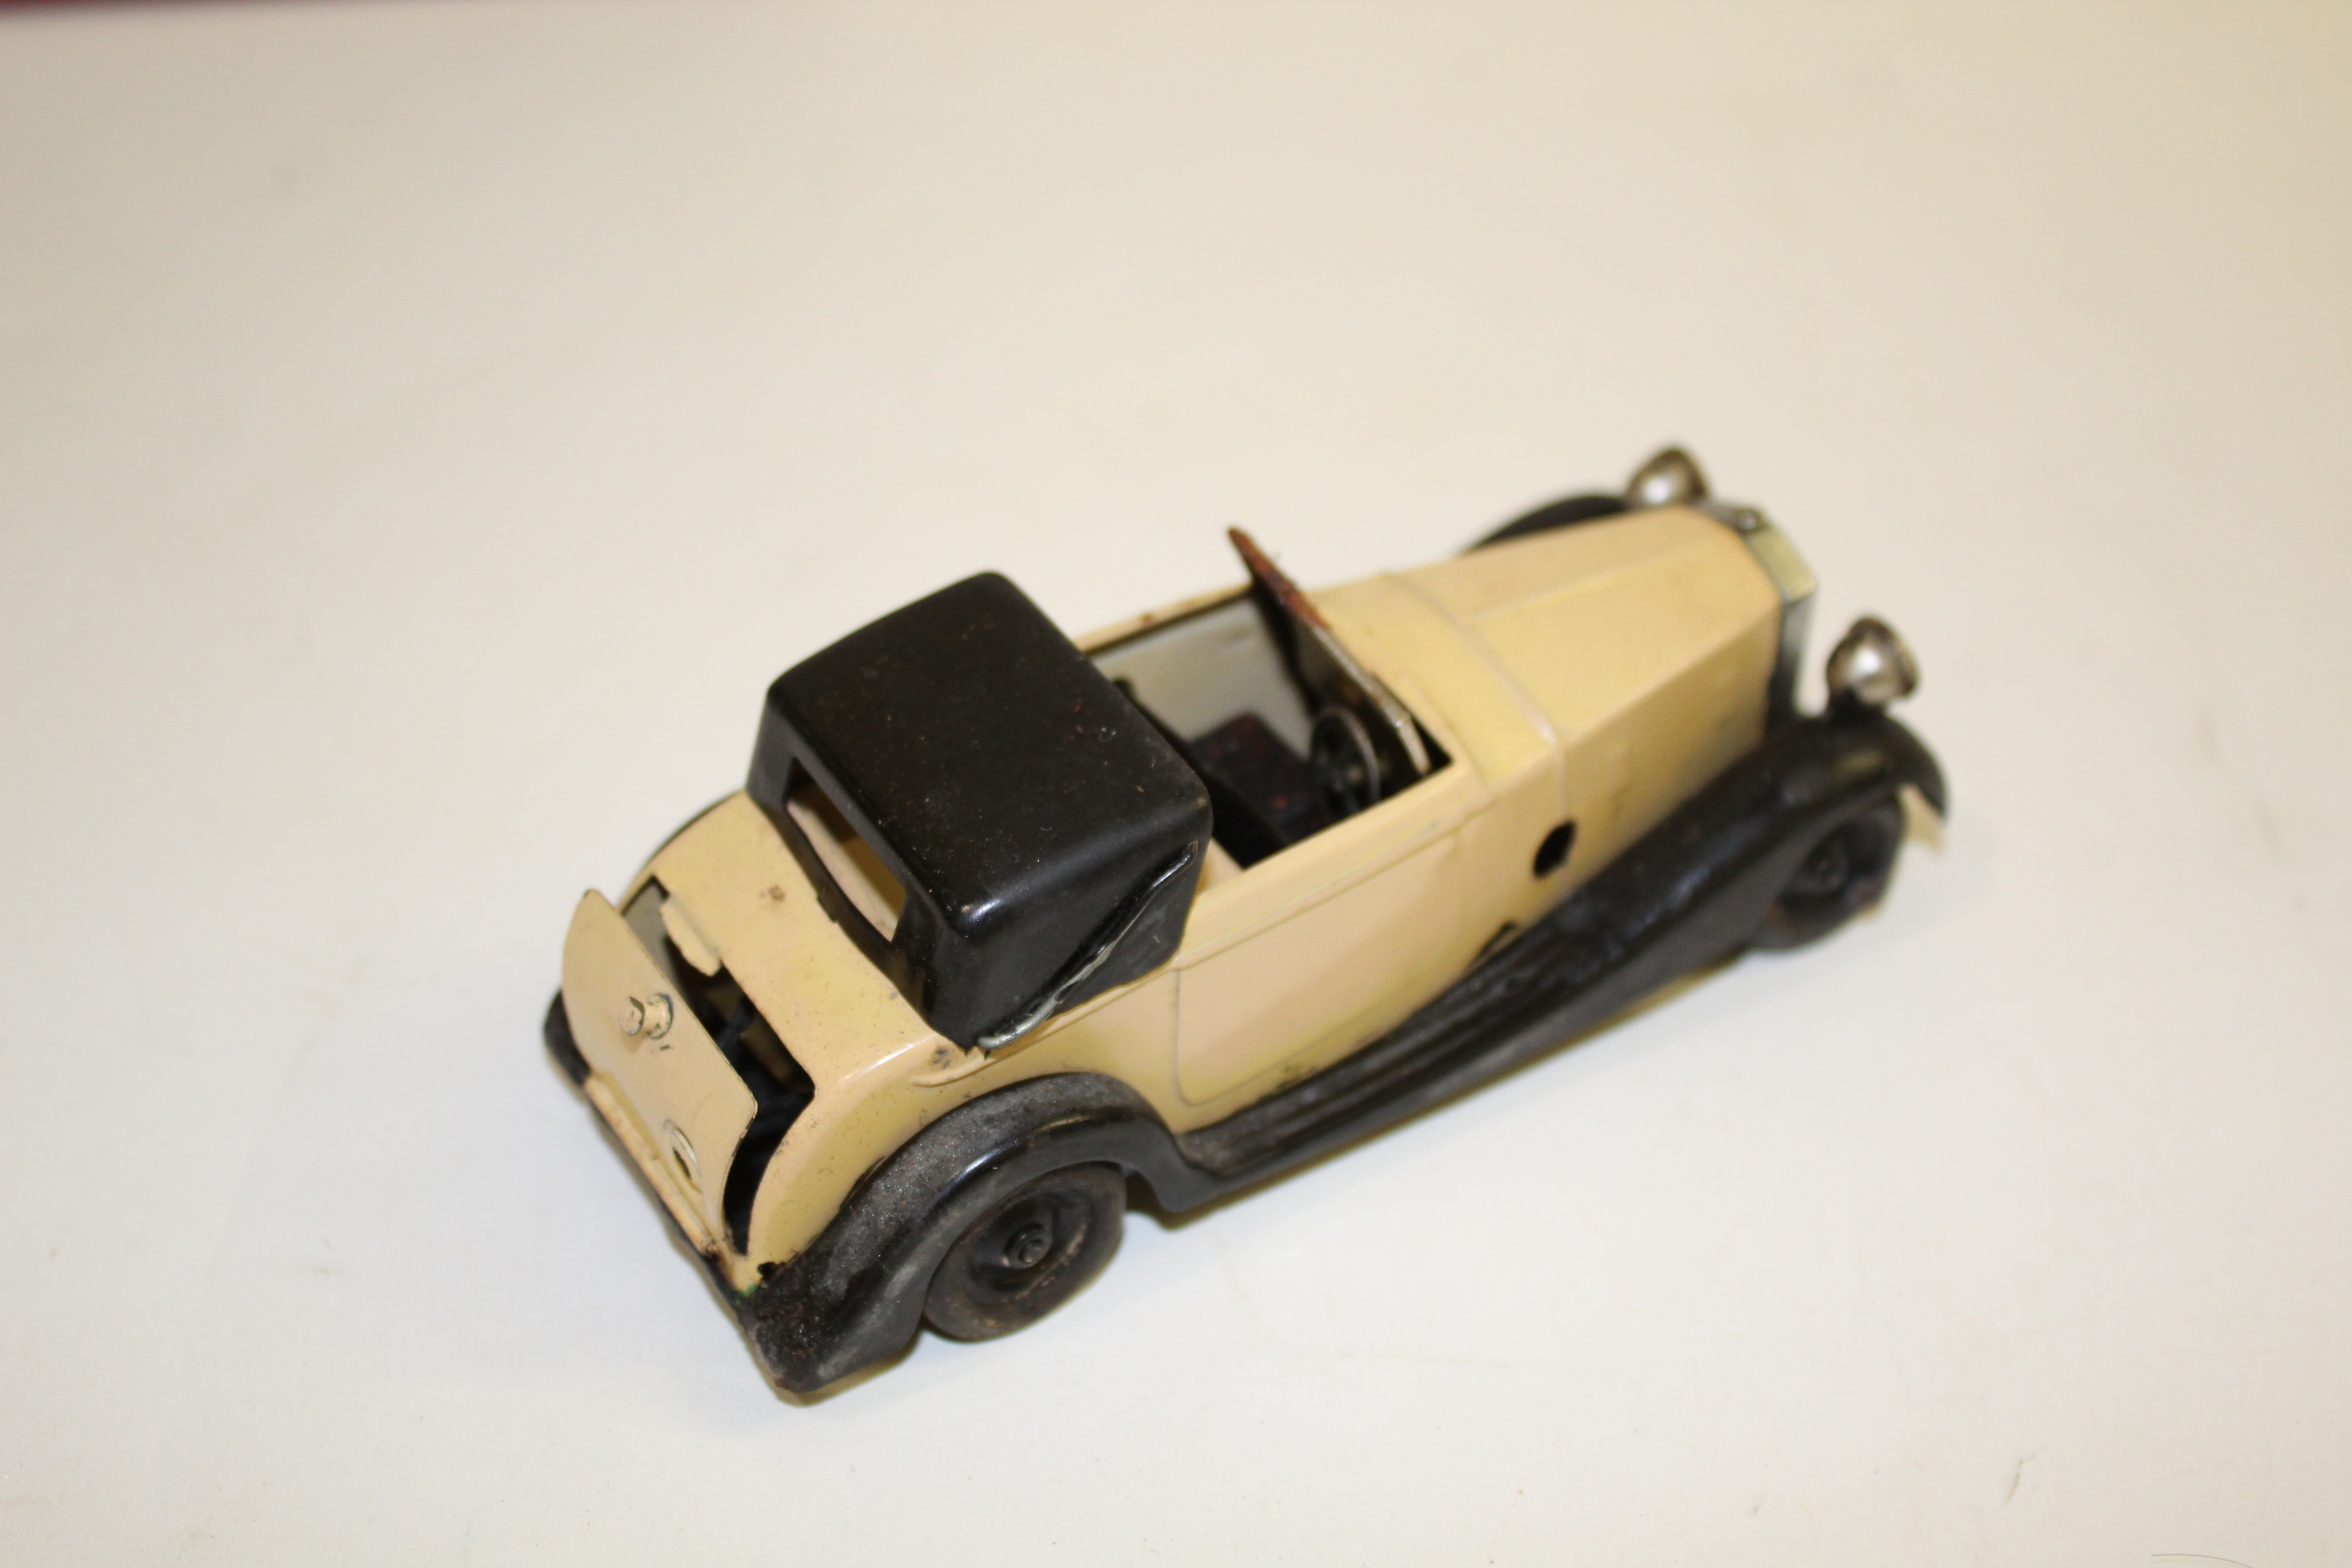 RARE TRIANG MINIC ROLLS ROYCE SEDANCA - ELECTRIC HEADLAMPS Model No 50M, with a black hood and wings - Image 5 of 14